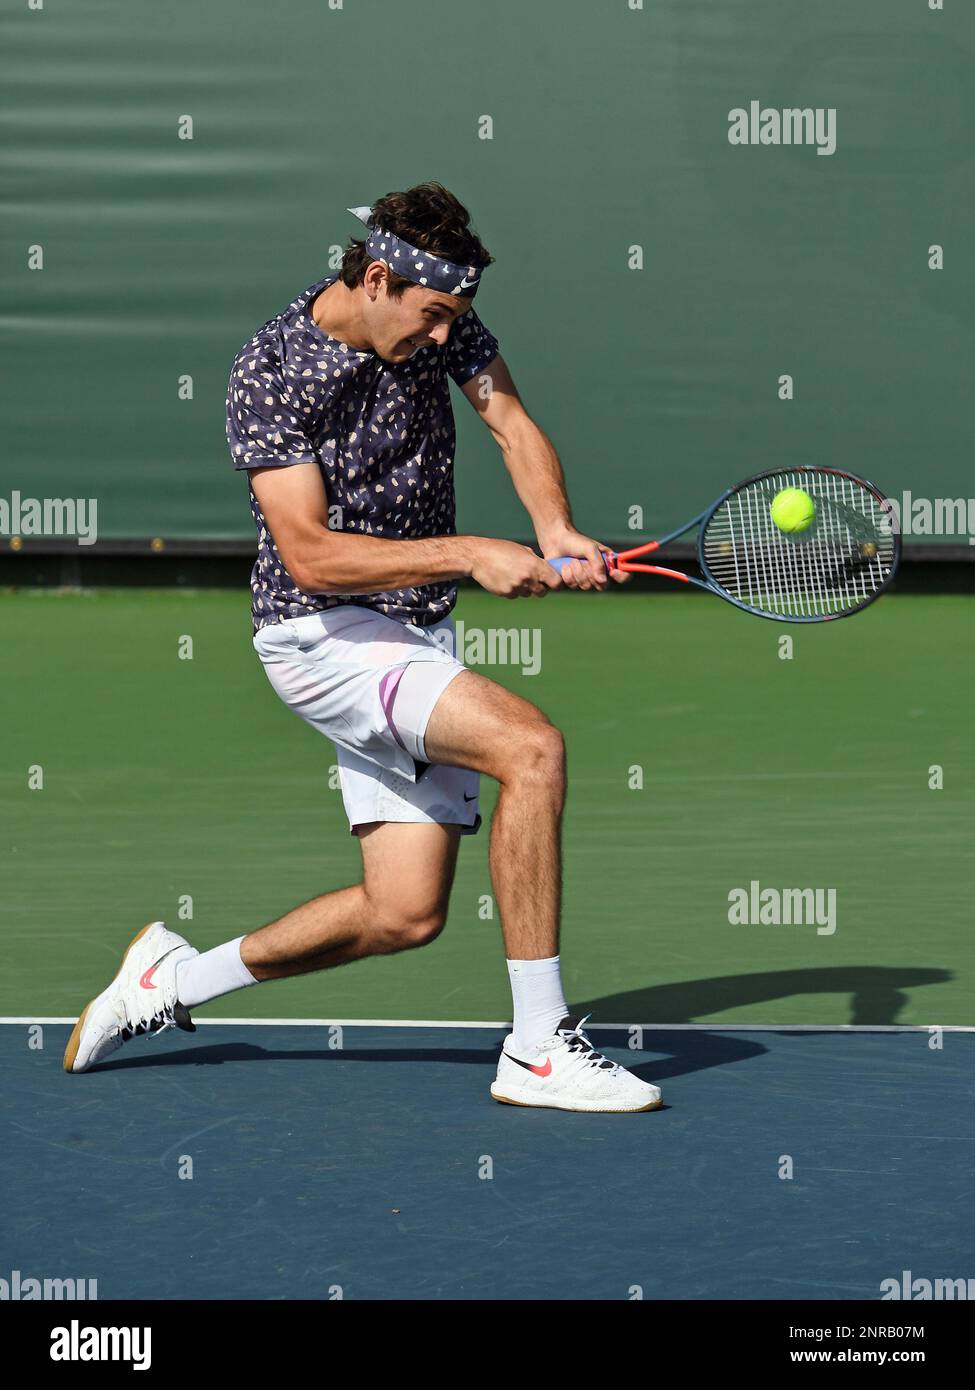 NEWPORT BEACH, CA - JANUARY 30: ATP tennis player Taylor Fritz (USA)  returns a shot during a match at the Oracle Challenger Series tennis  tournament played on January 30, 2020 at the